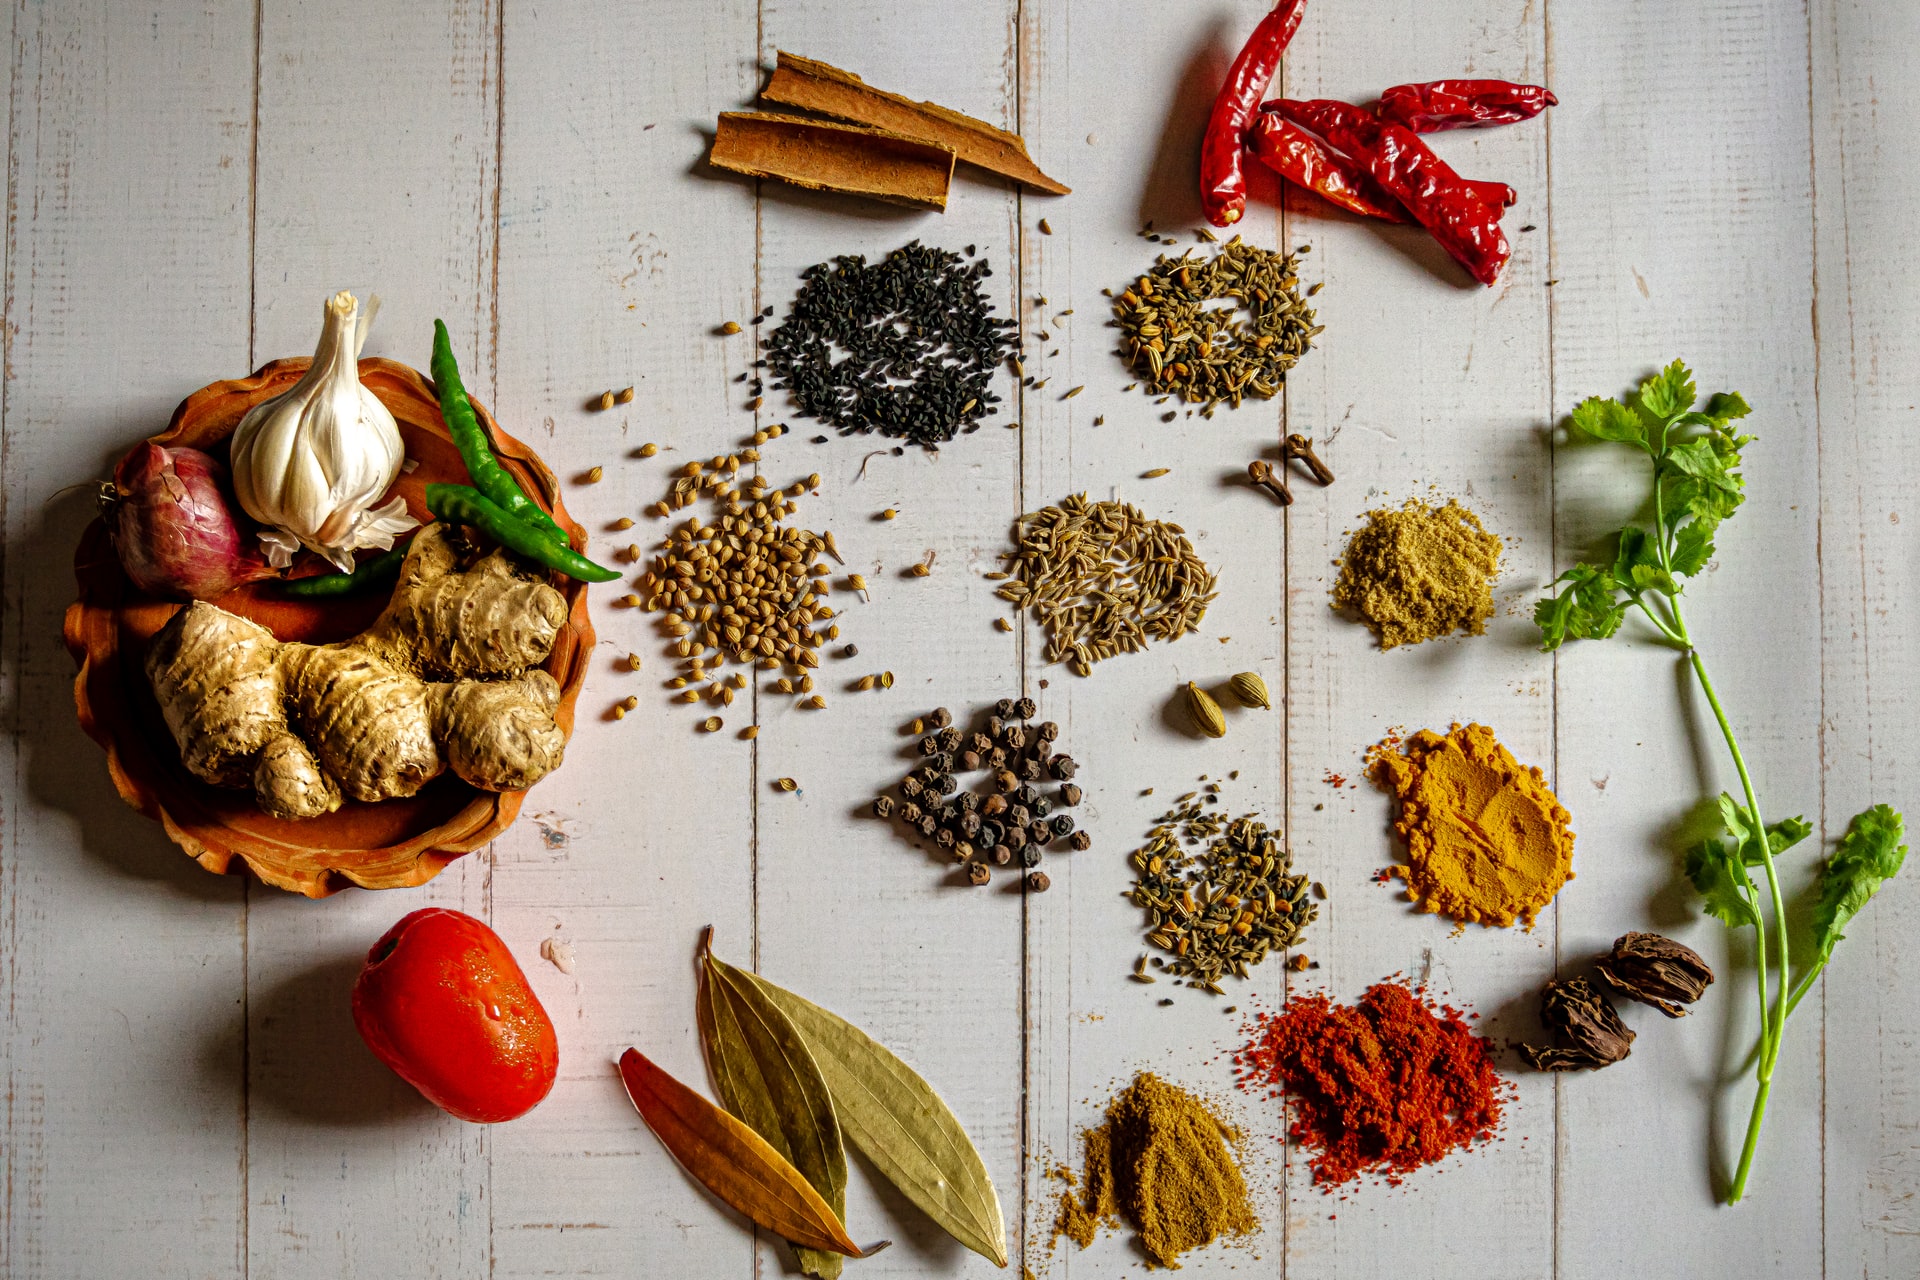 A variety of spices including ginger, garlic, peppercorn, cinnamon and more